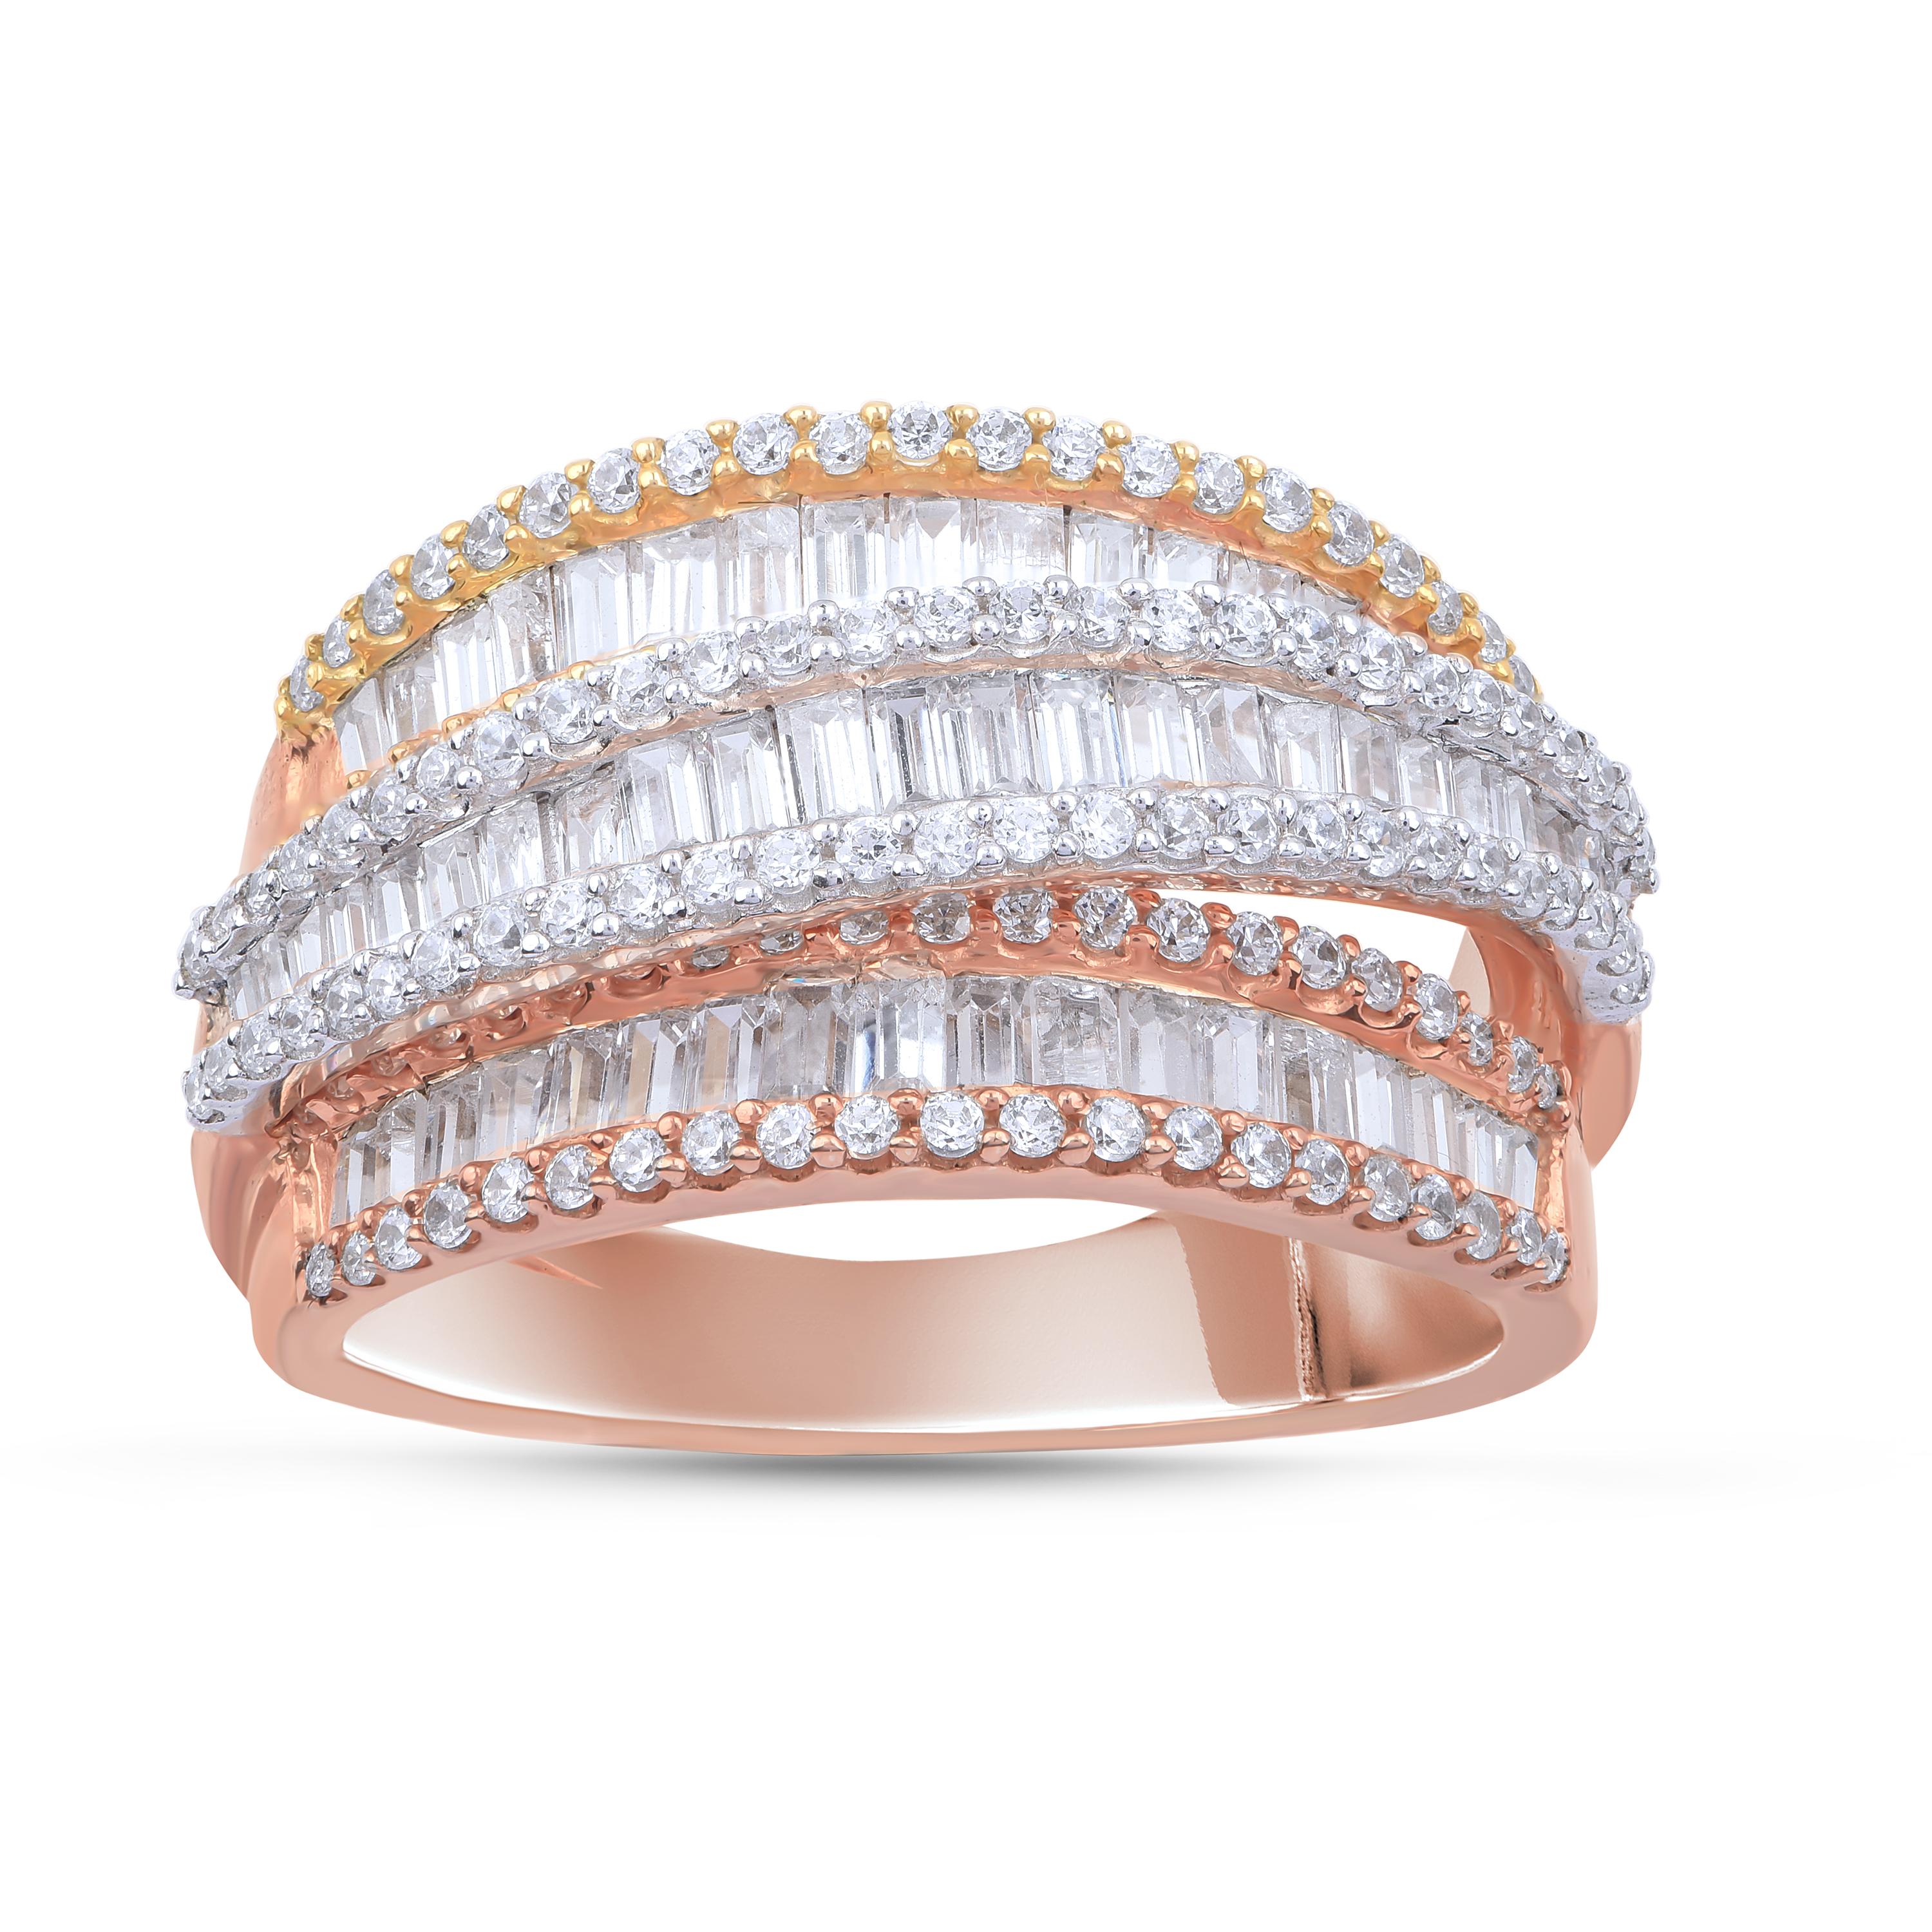 The impressive diamond ring is embellished with 138 brilliant and 59 baguette diamonds in prong and channel setting and made in 18-karat rose gold. Diamonds are graded H-I Color, I2 Clarity. 

Metal color and ring size can be customized on request.